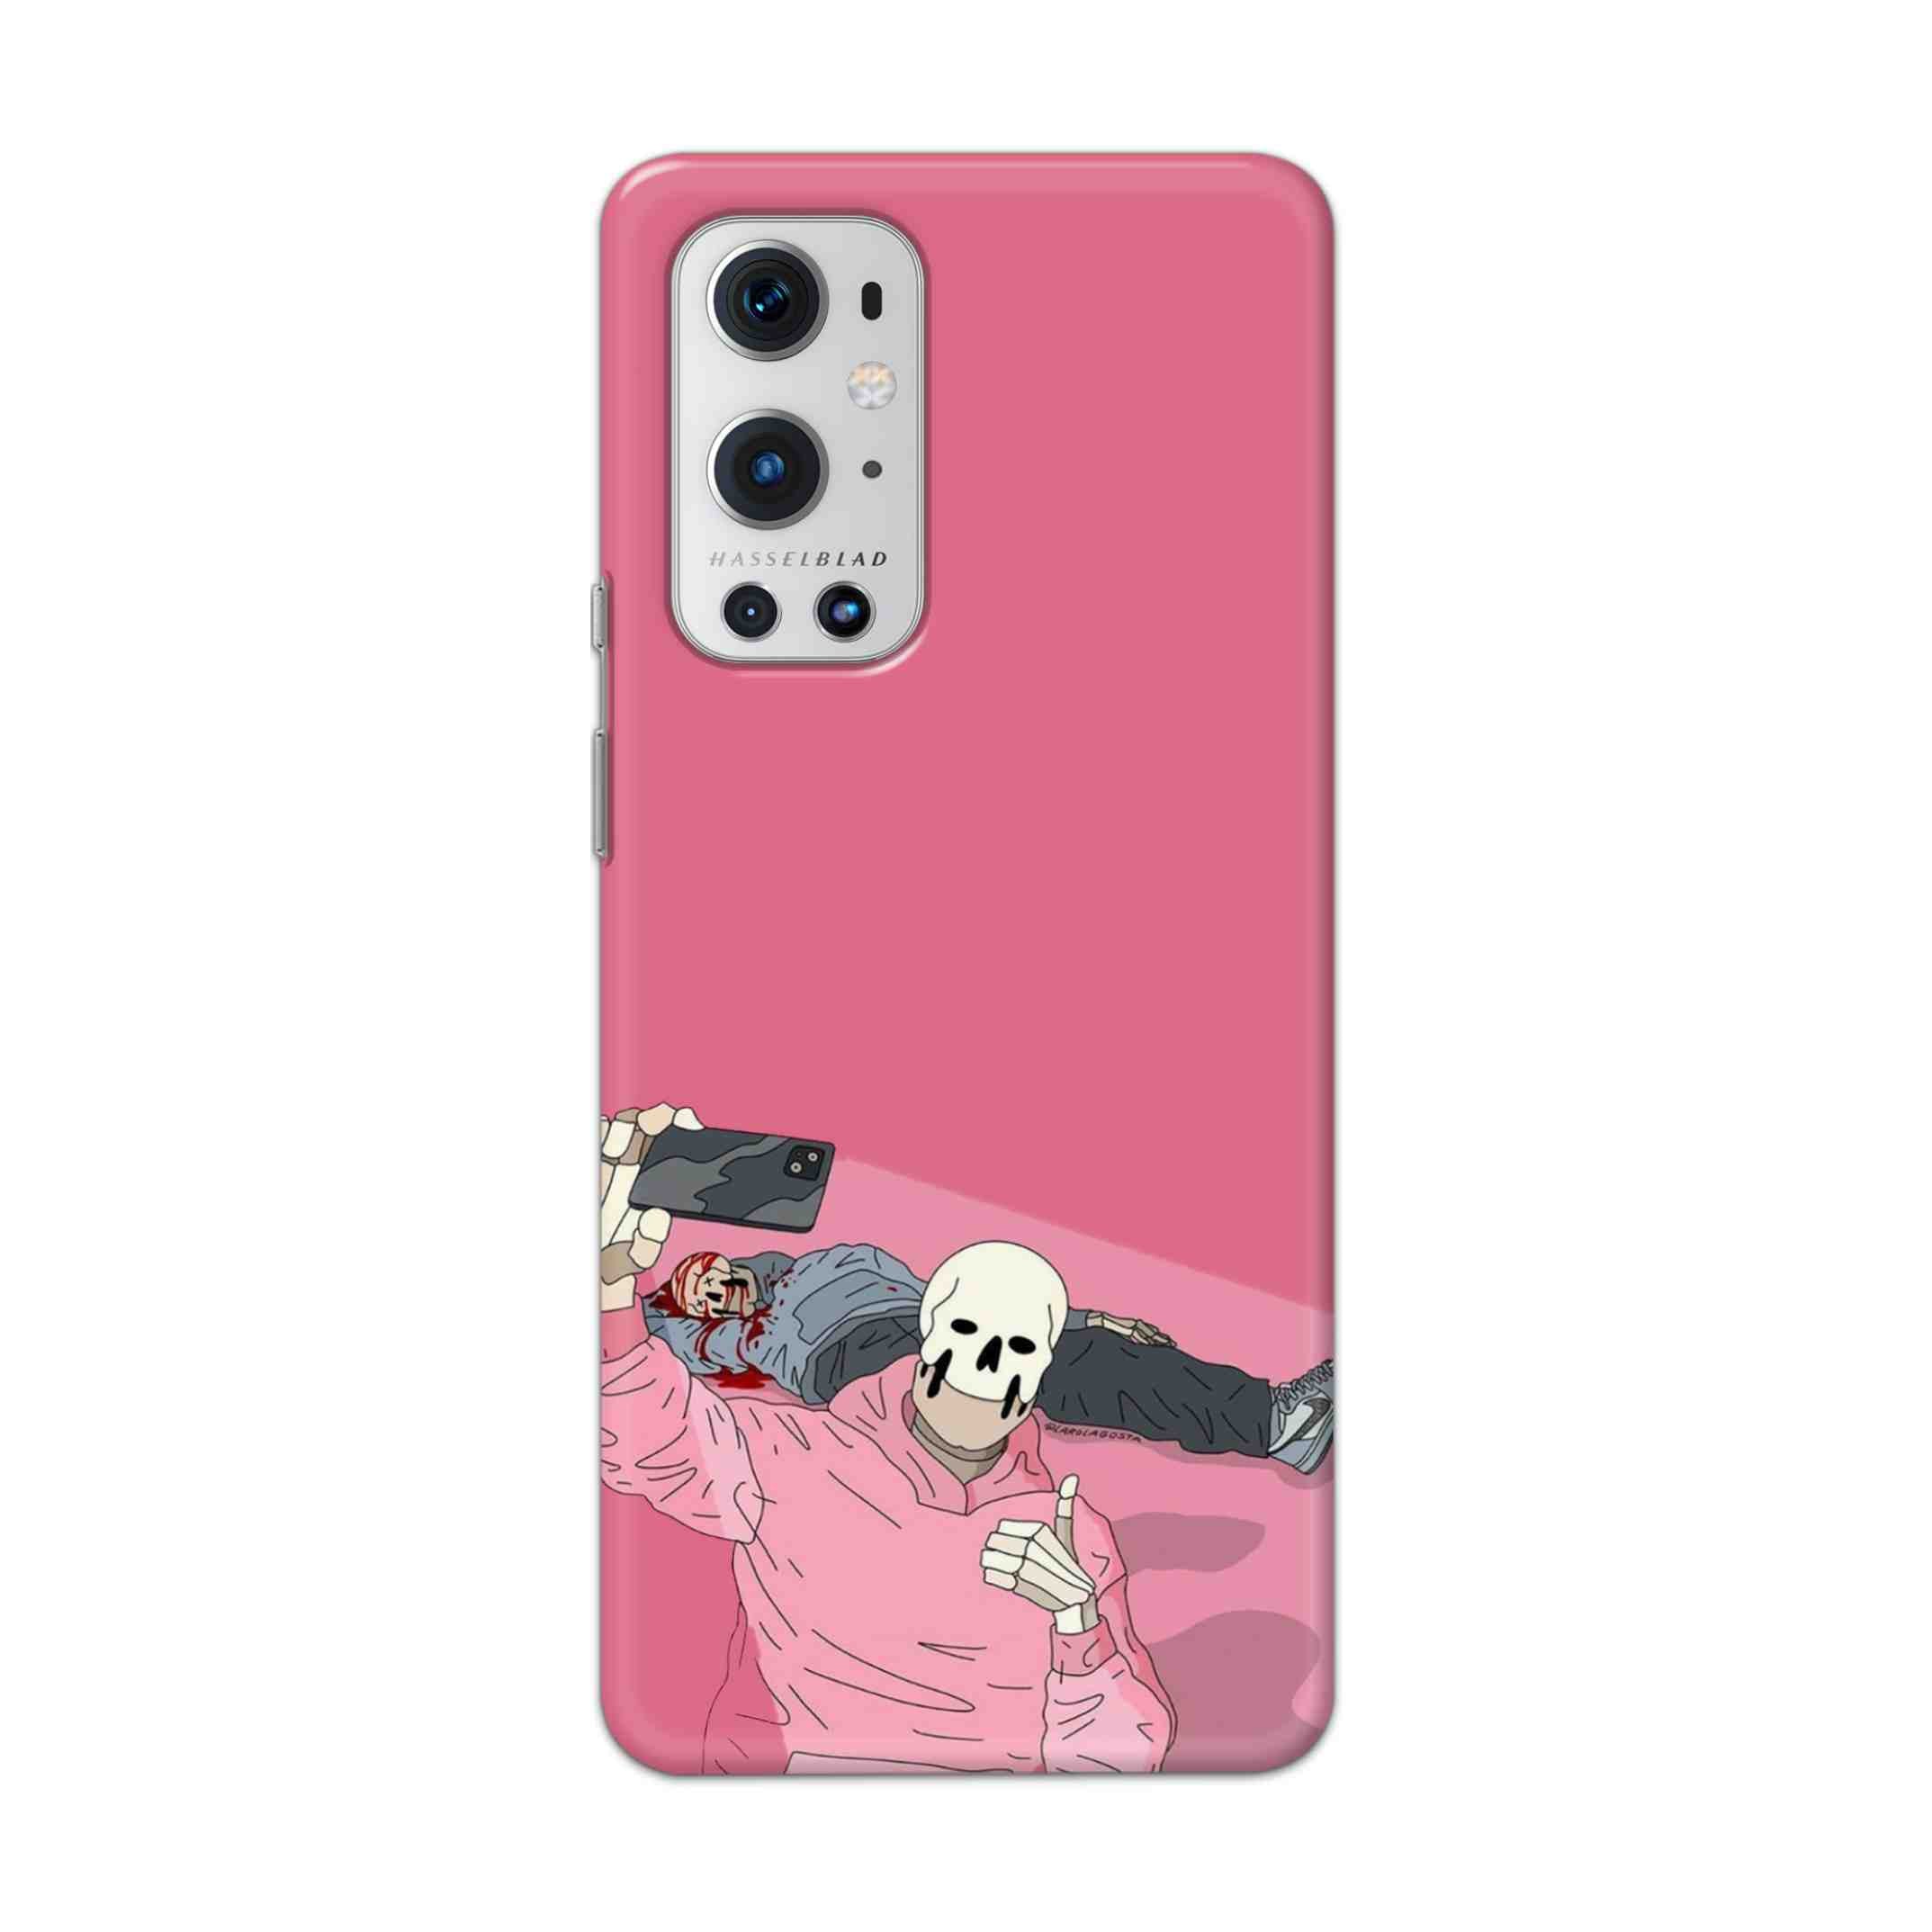 Buy Selfie Hard Back Mobile Phone Case Cover For OnePlus 9 Pro Online